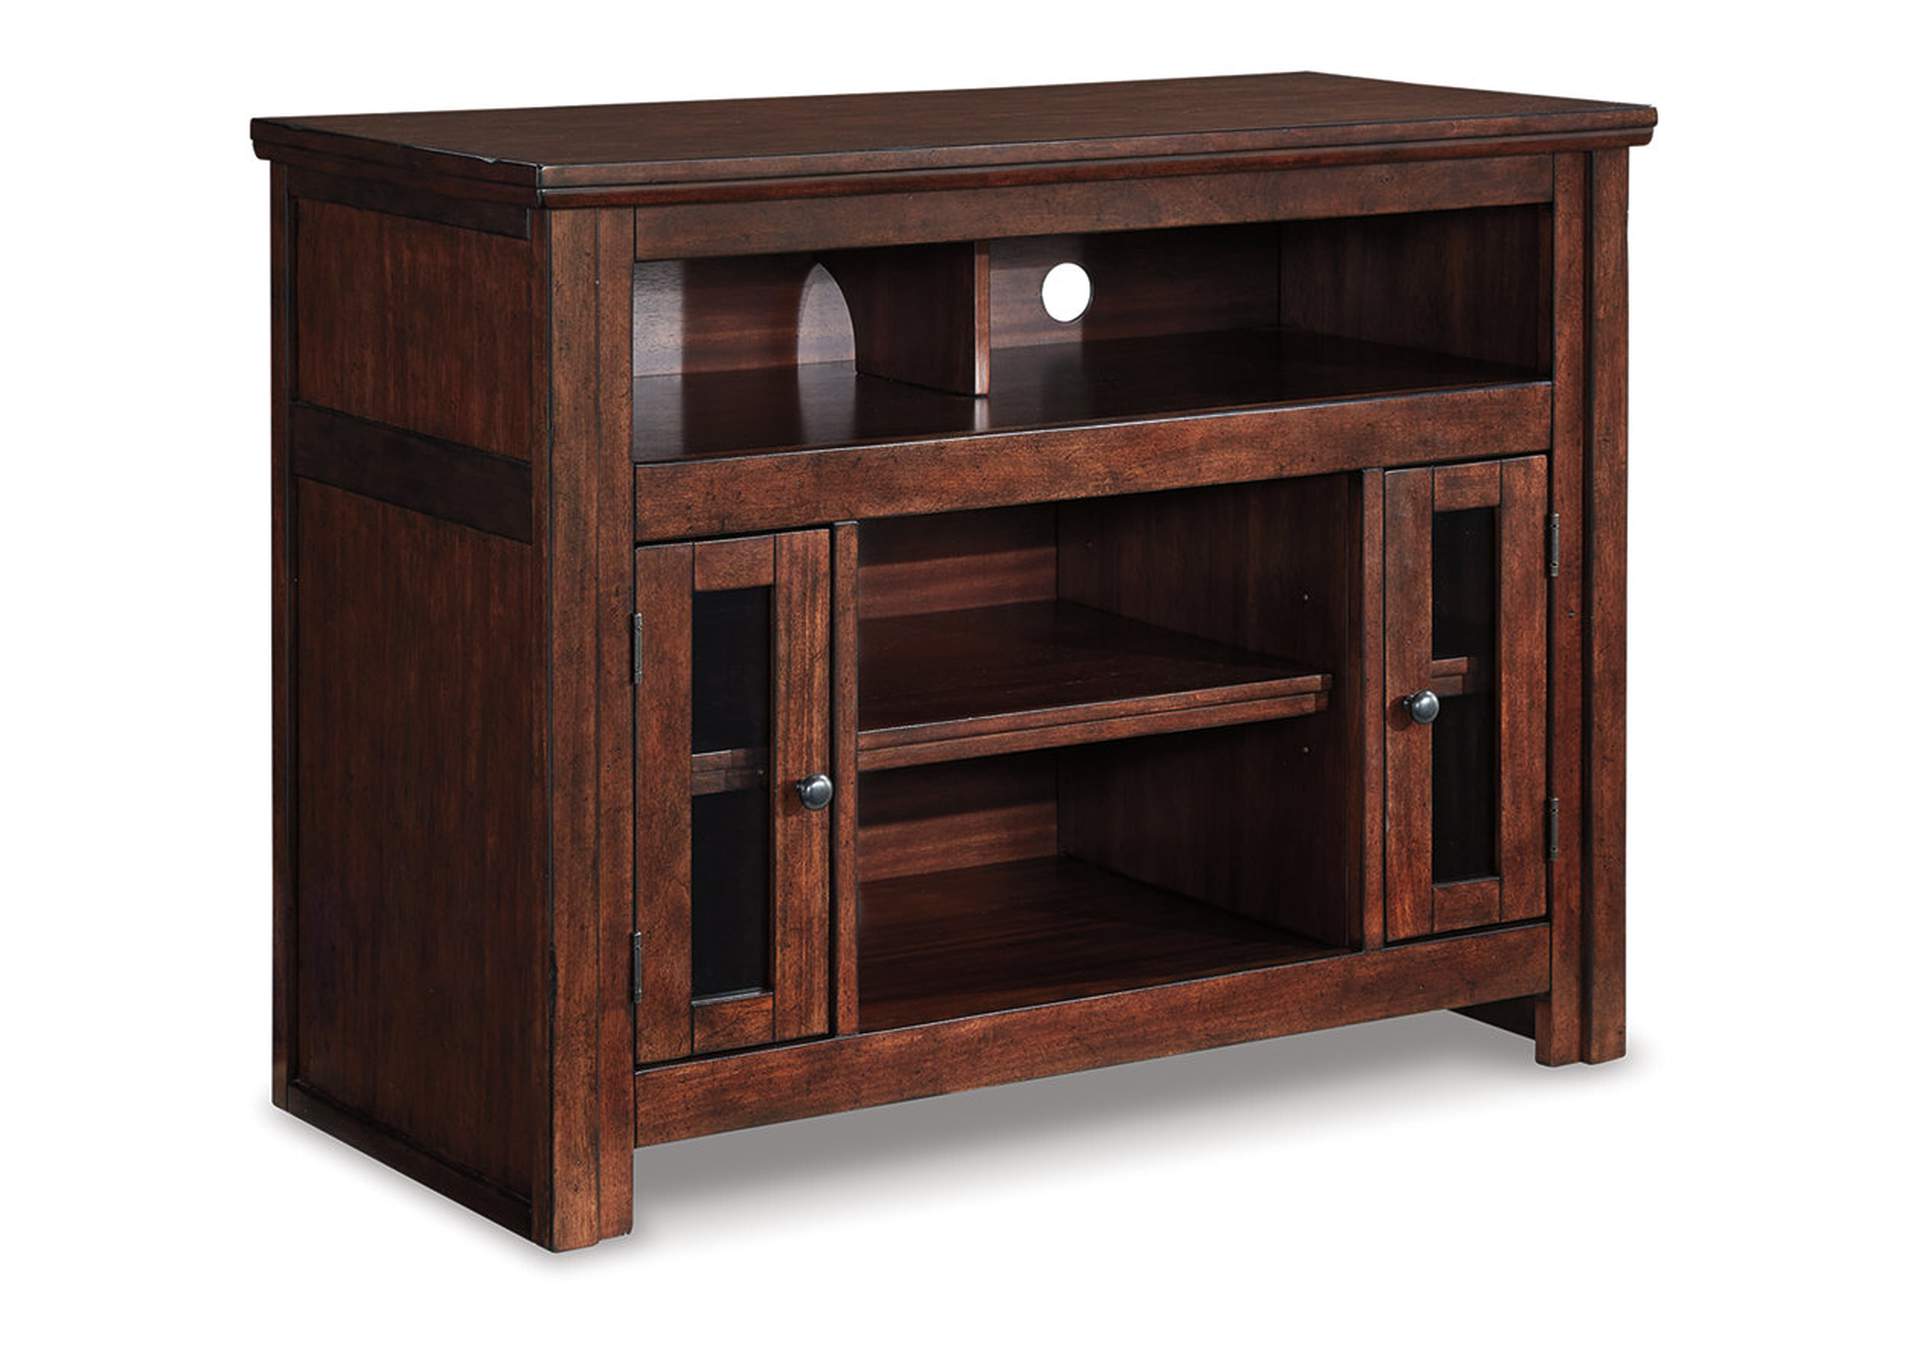 Harpan 42" TV Stand,Signature Design By Ashley